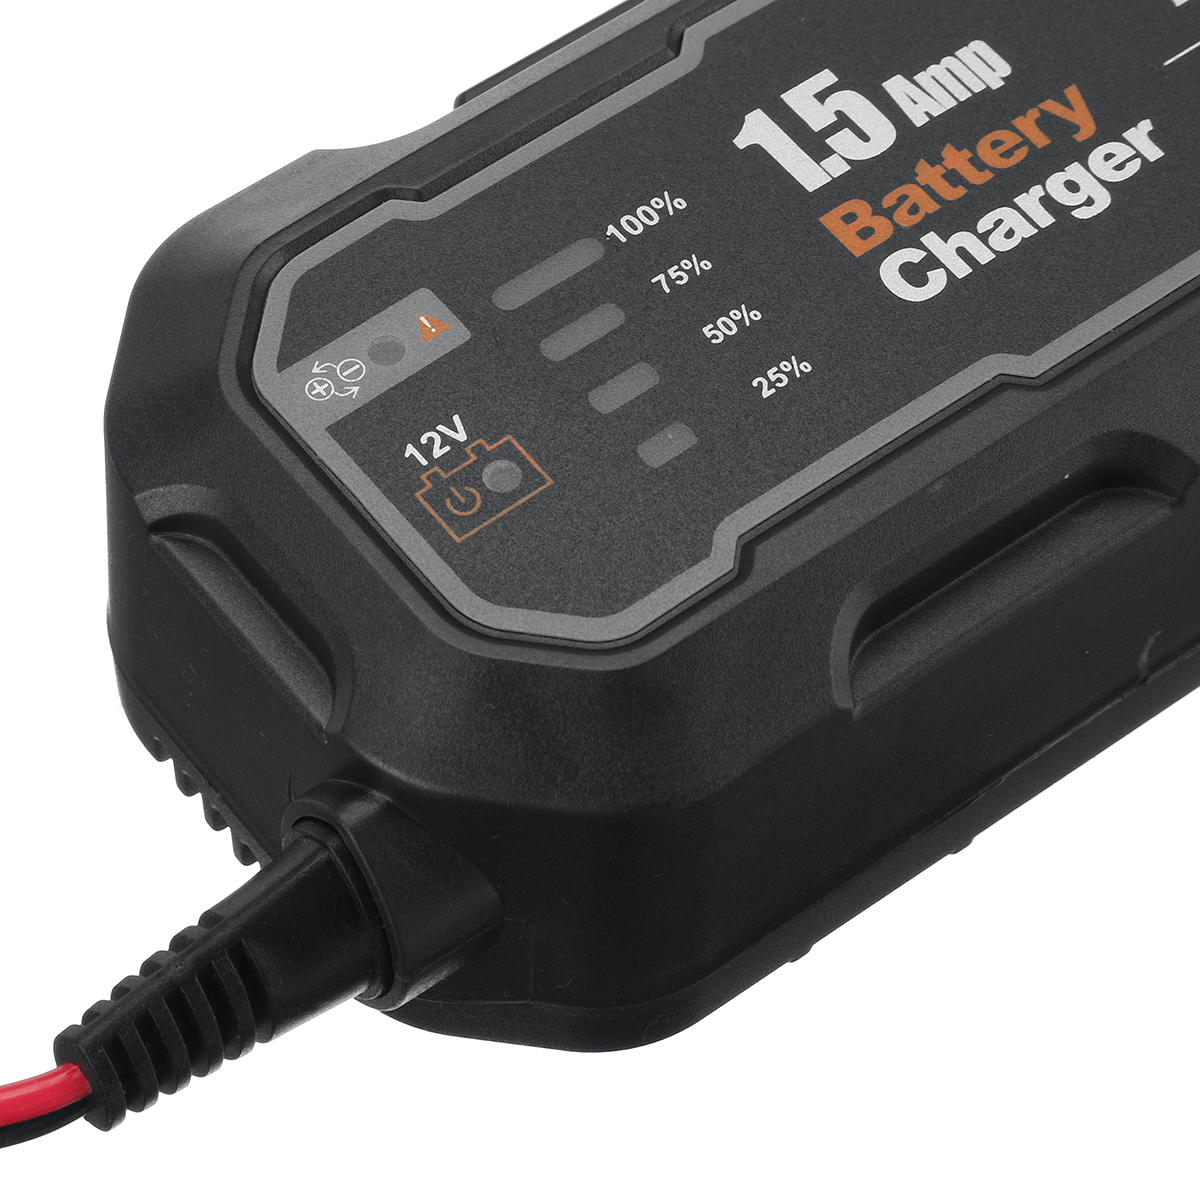 Portable 12V Auto Battery Charger Maintainer for Car Motorcycle Outdoor